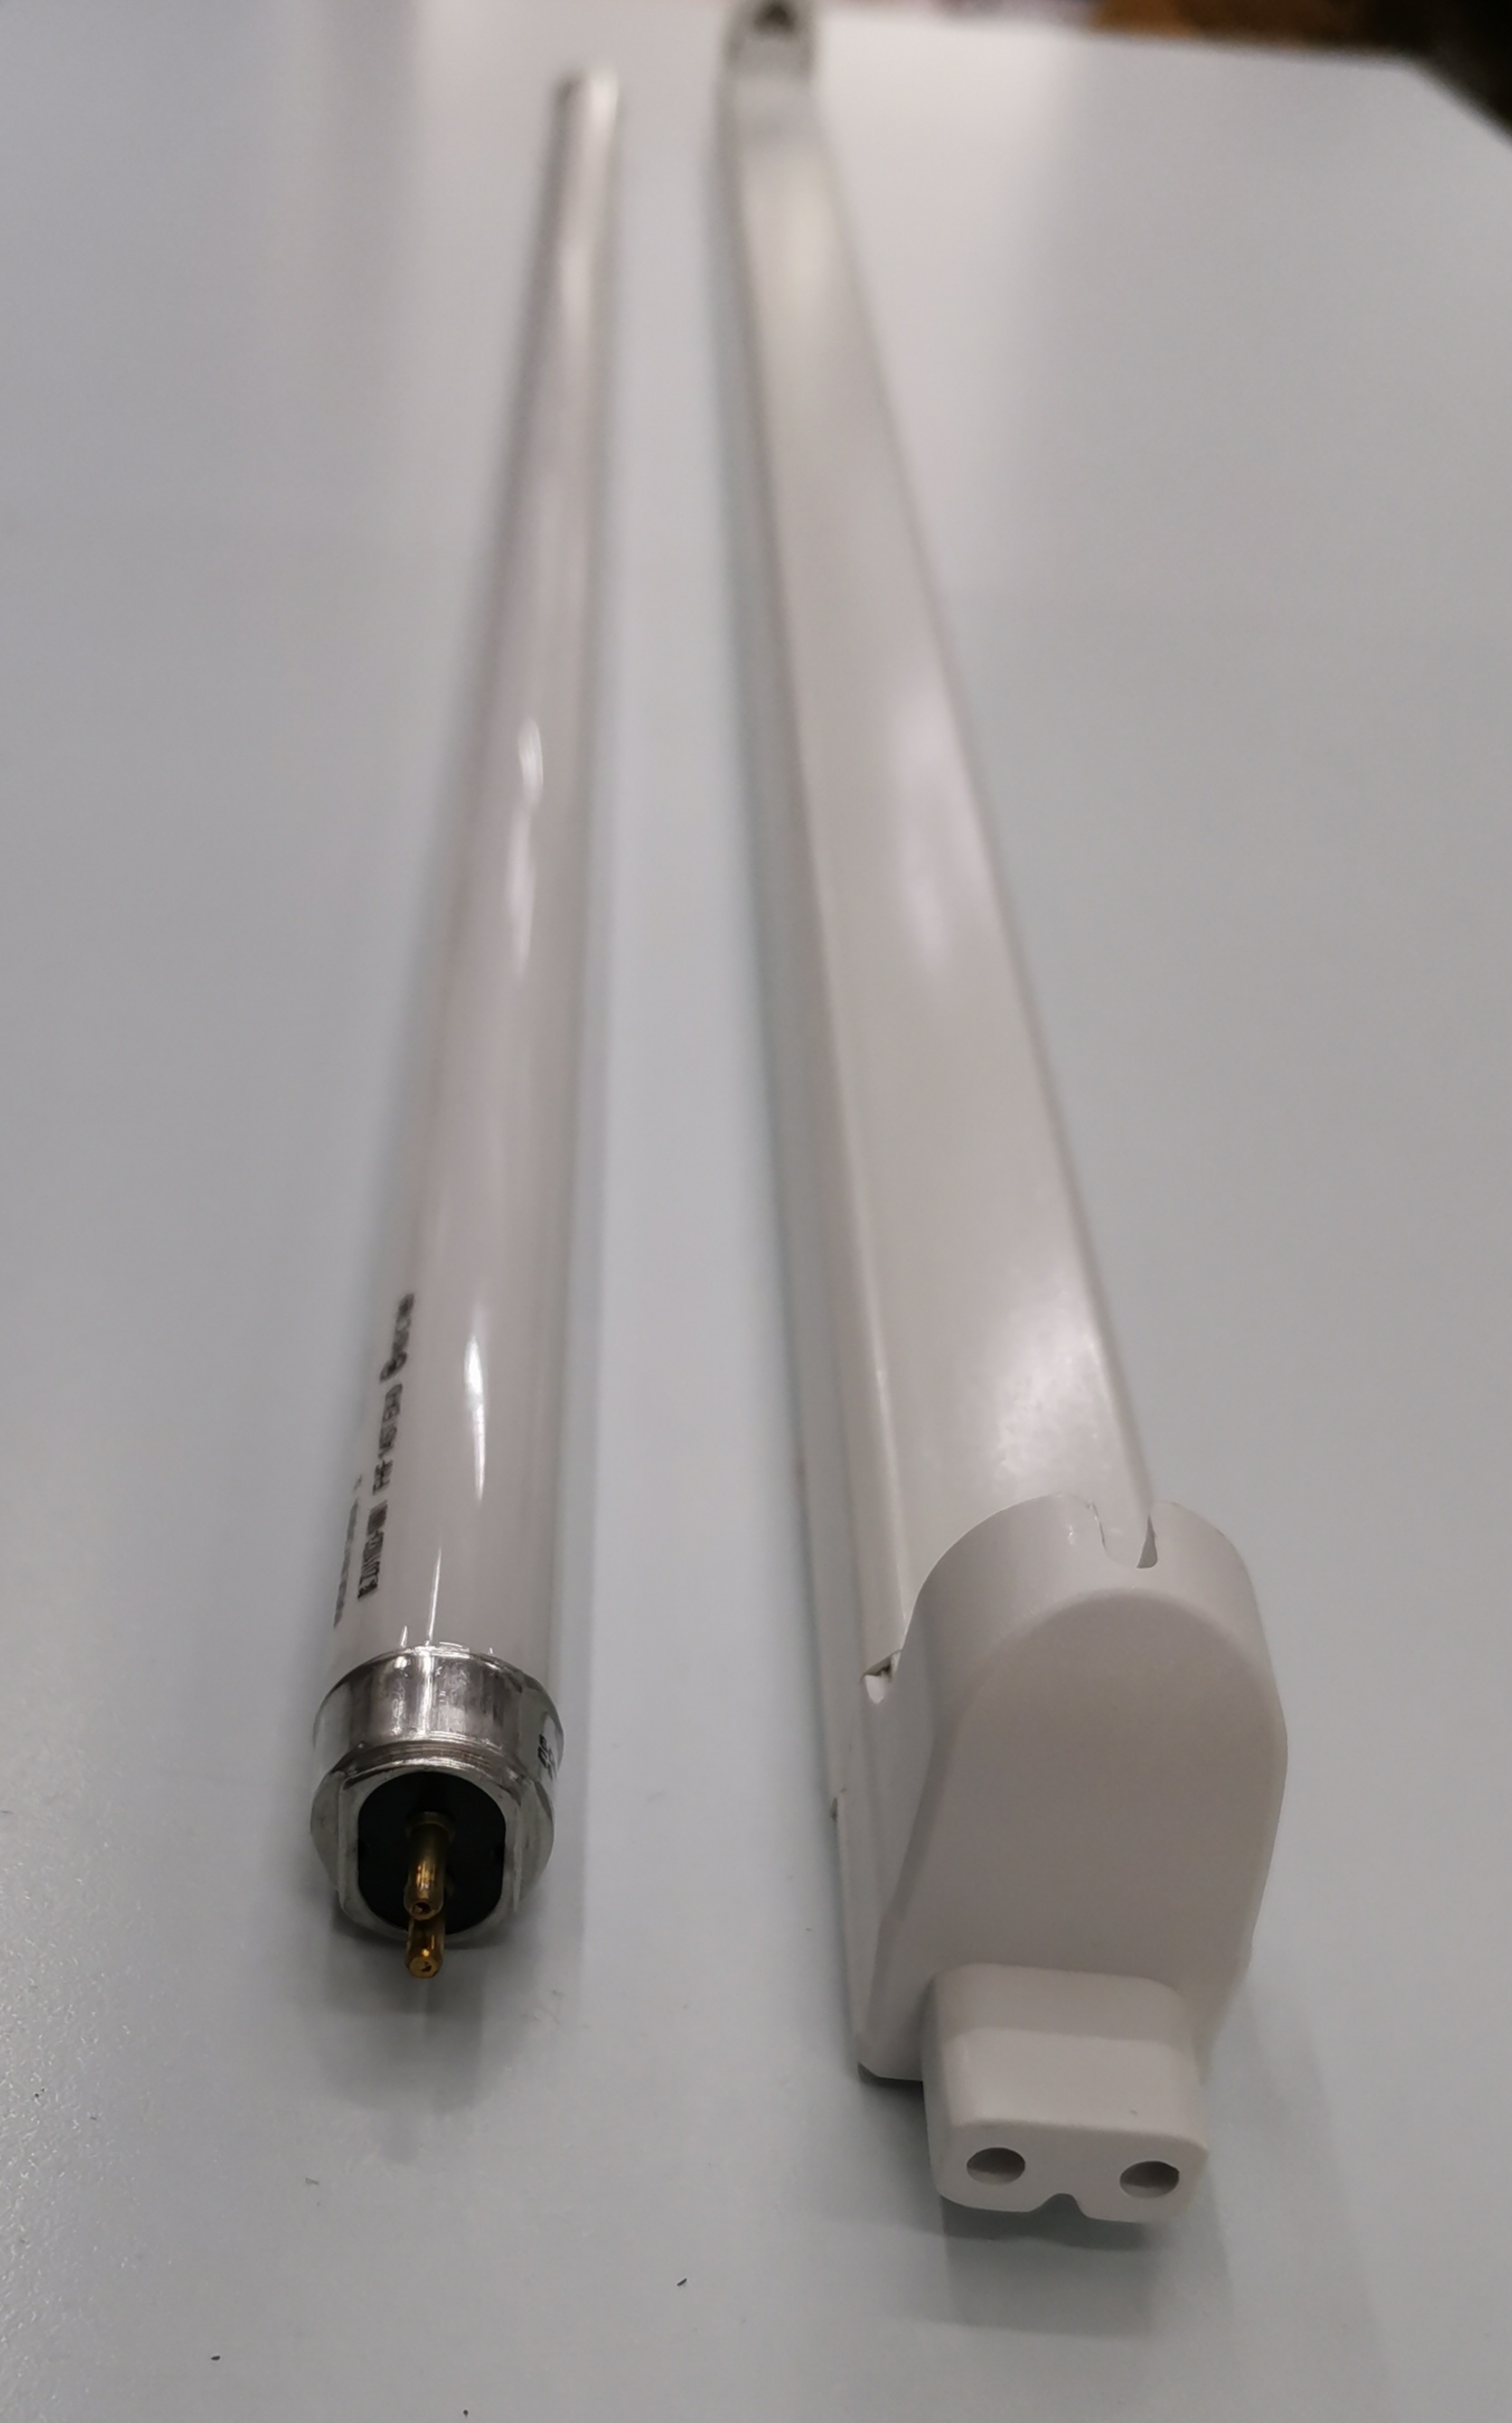 28W T-5 Fluorescent Tube with Fixture 220V, T5 Fluorescent Lamp 28 .